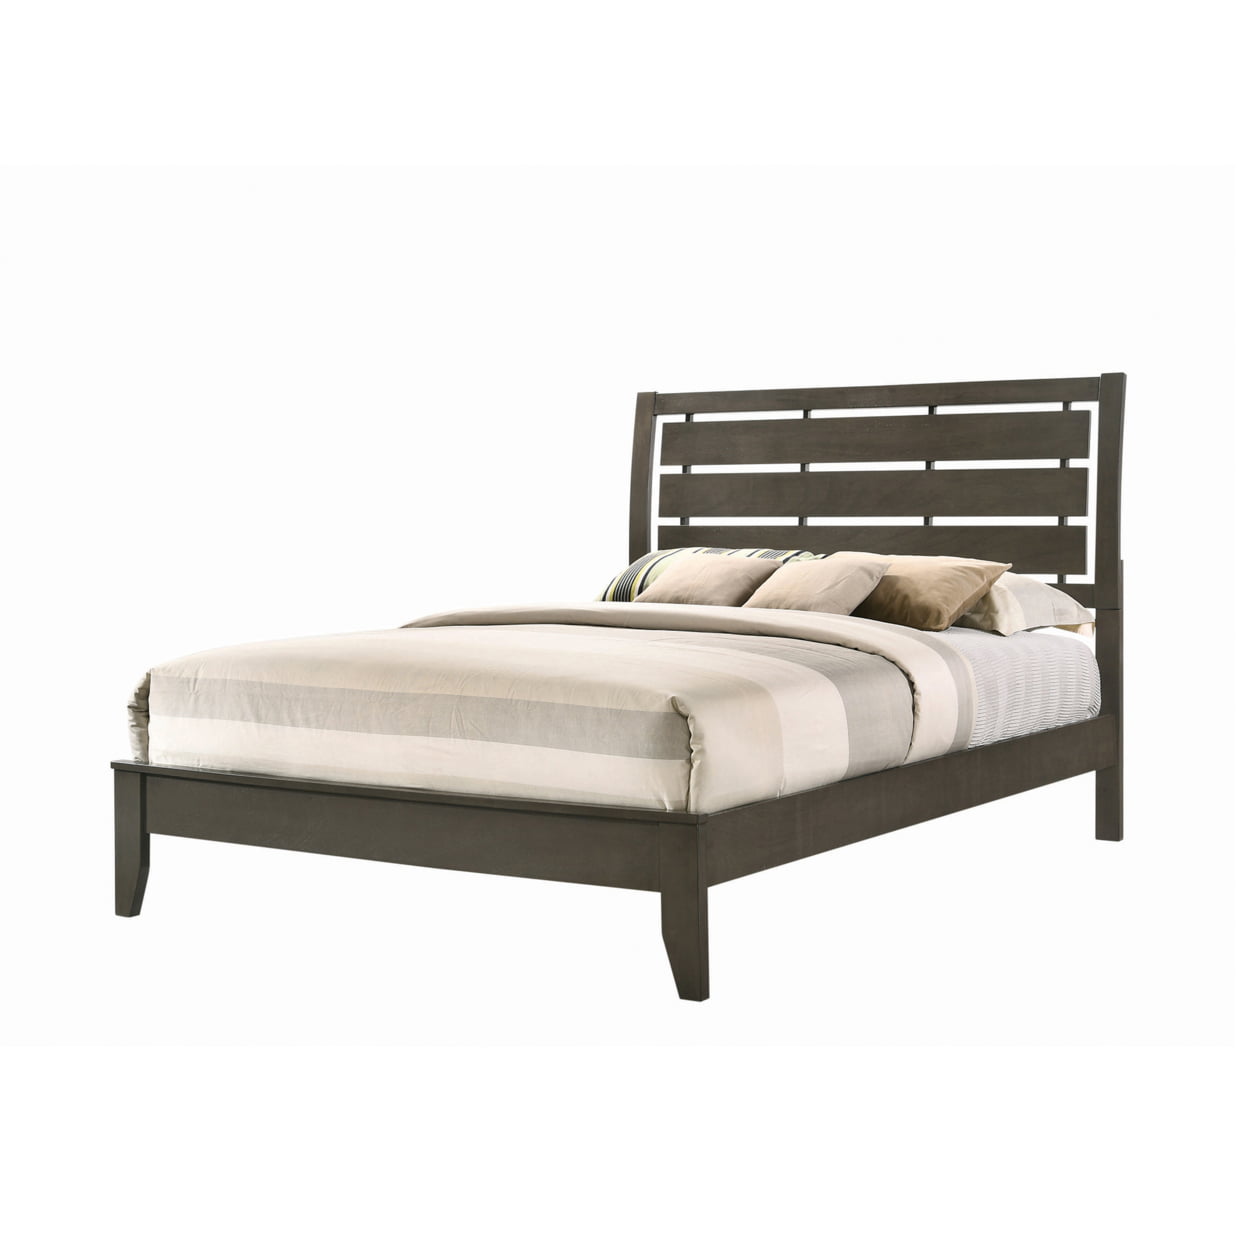 BM208183 Transitional Wooden Queen Size Bed with Slatted Style Headboard, Gray -  Benzara